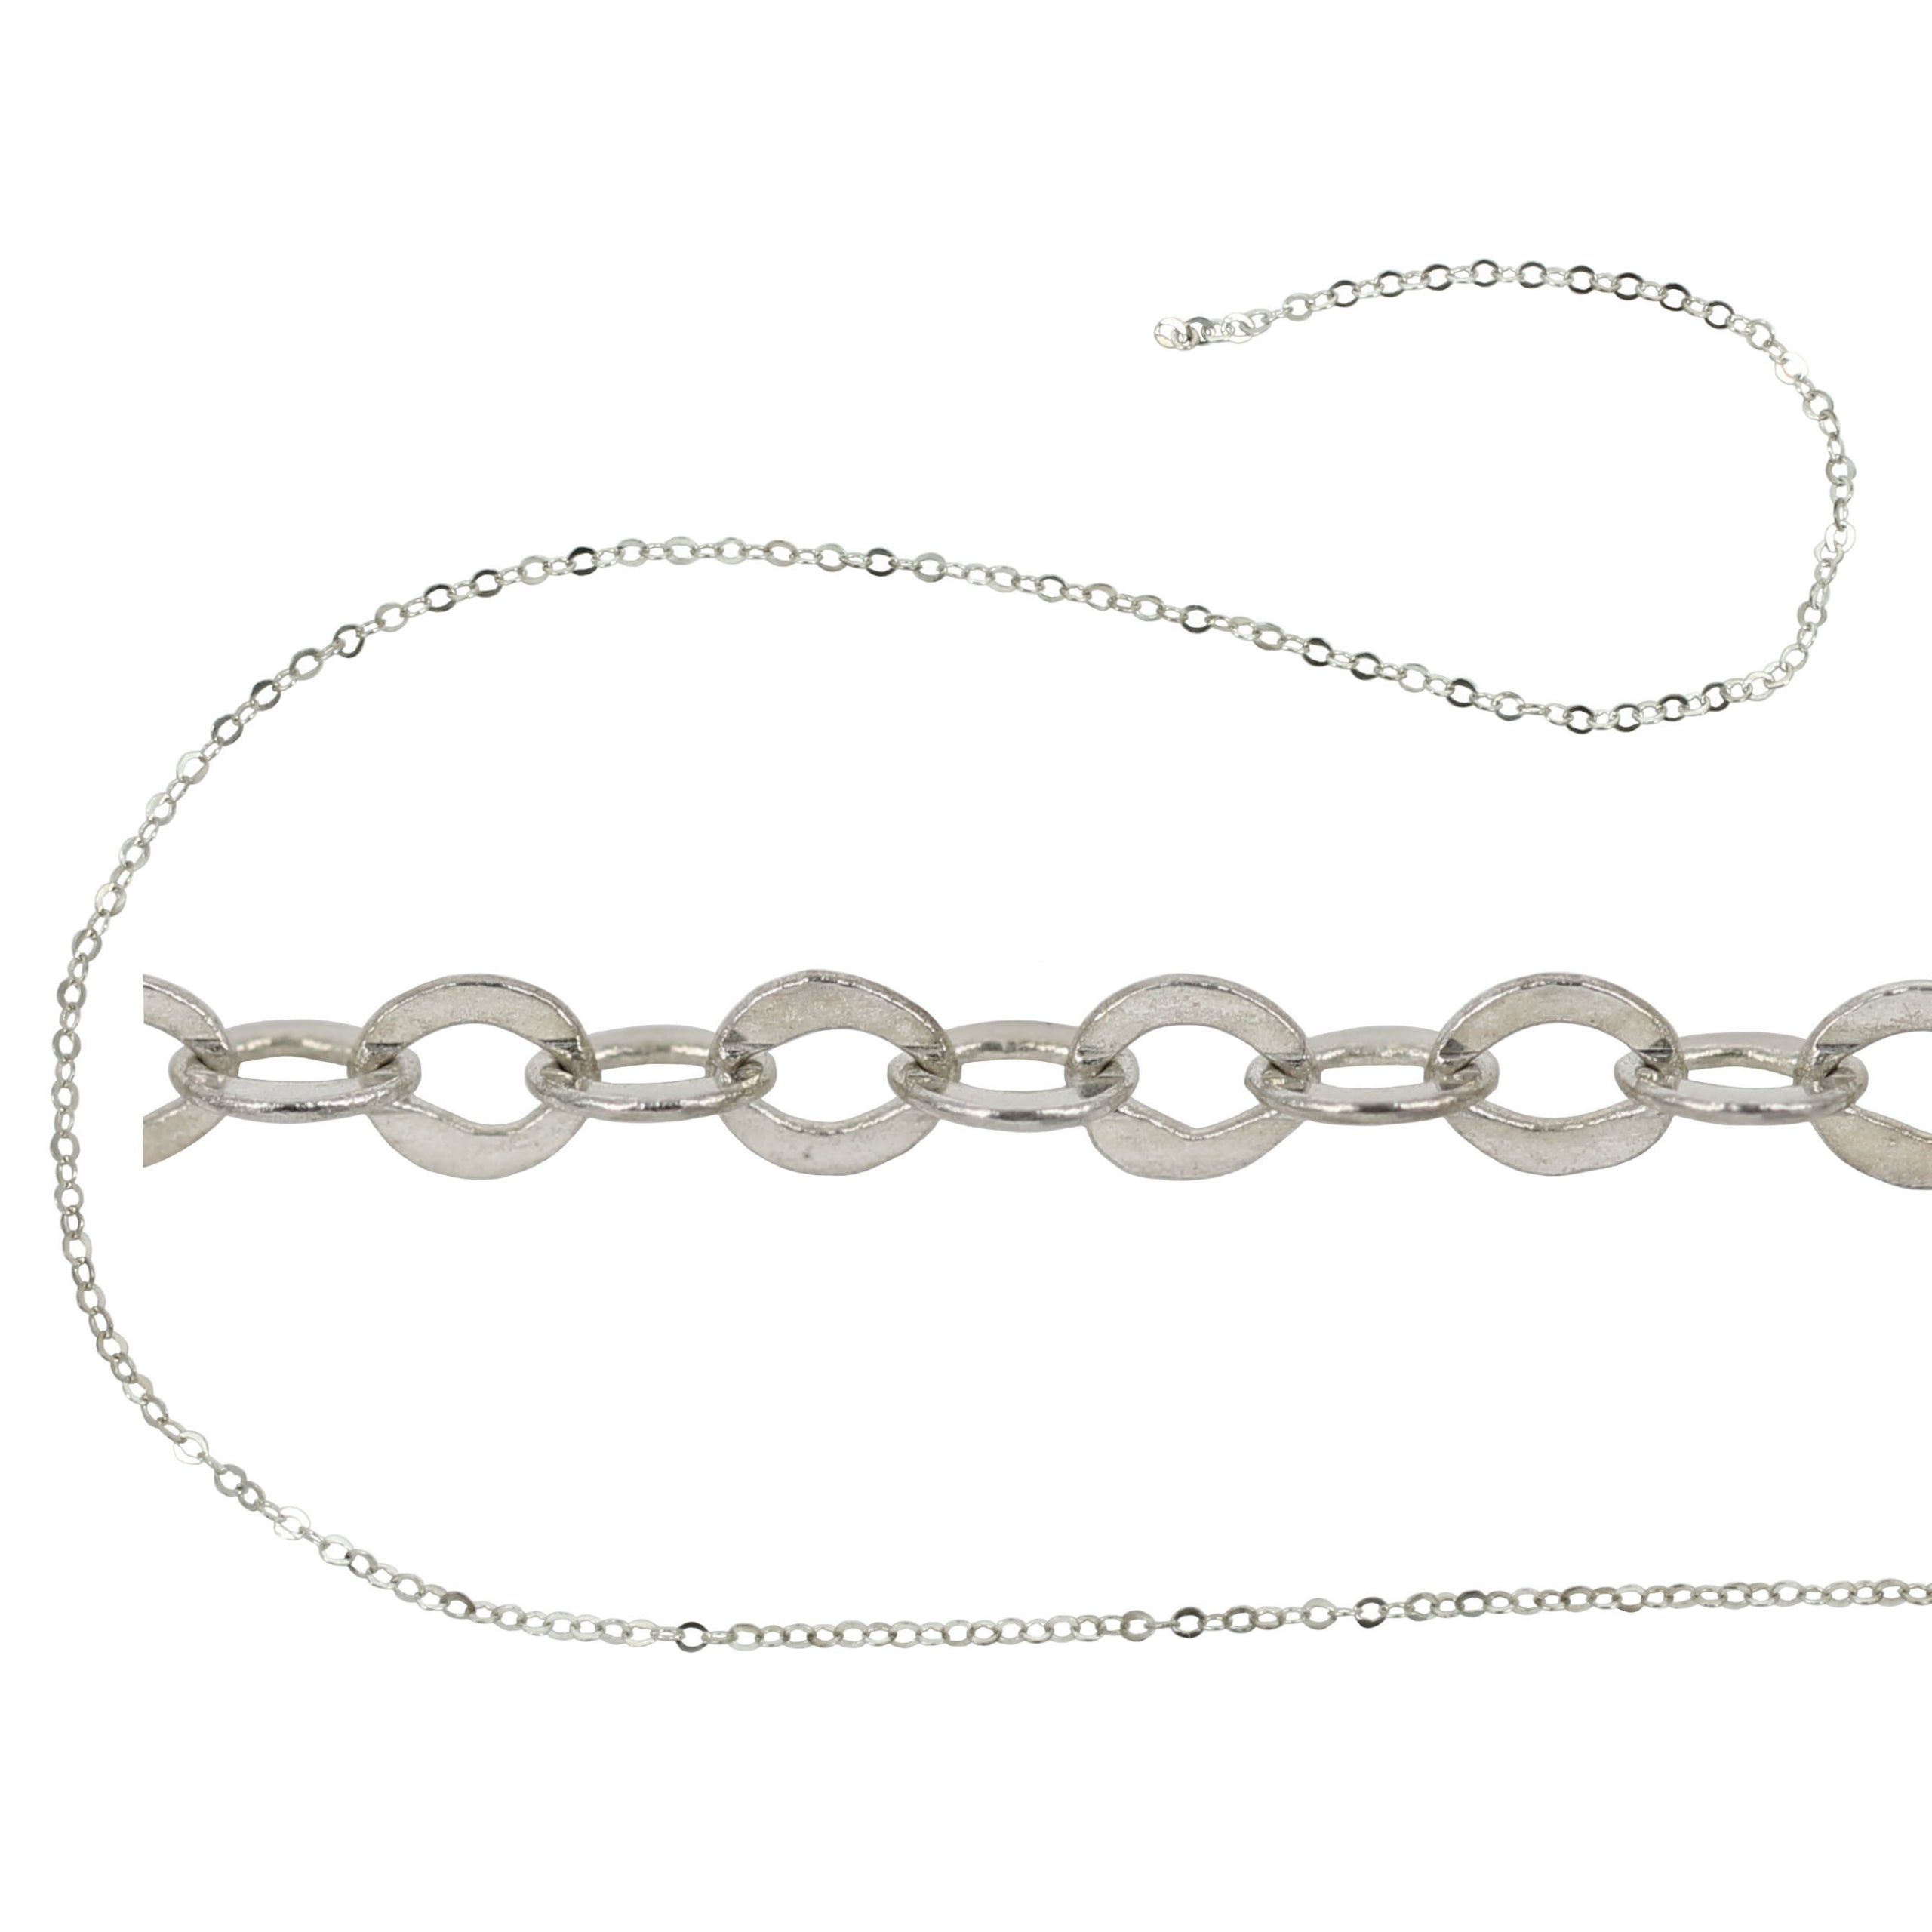 Flat Cable Chain in Sterling Silver 1.6mm x 2.0mm links